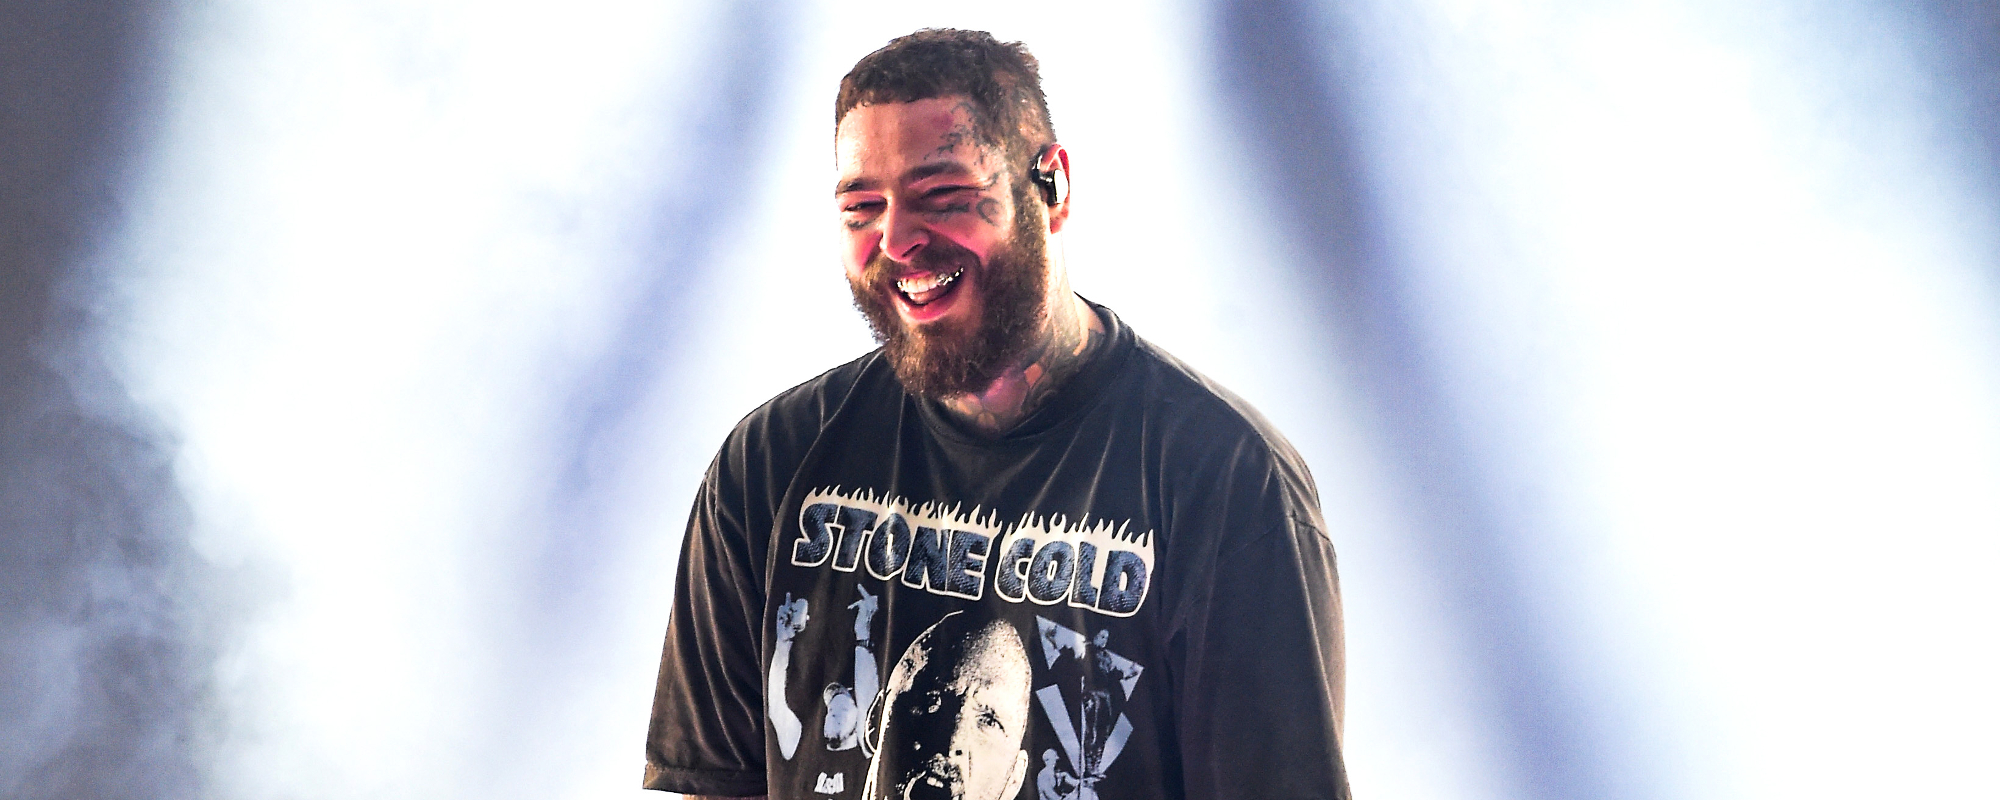 Watch Post Malone’s Wholesome Reaction to Fan’s Gift at Concert: “My Daughter Would Love This”